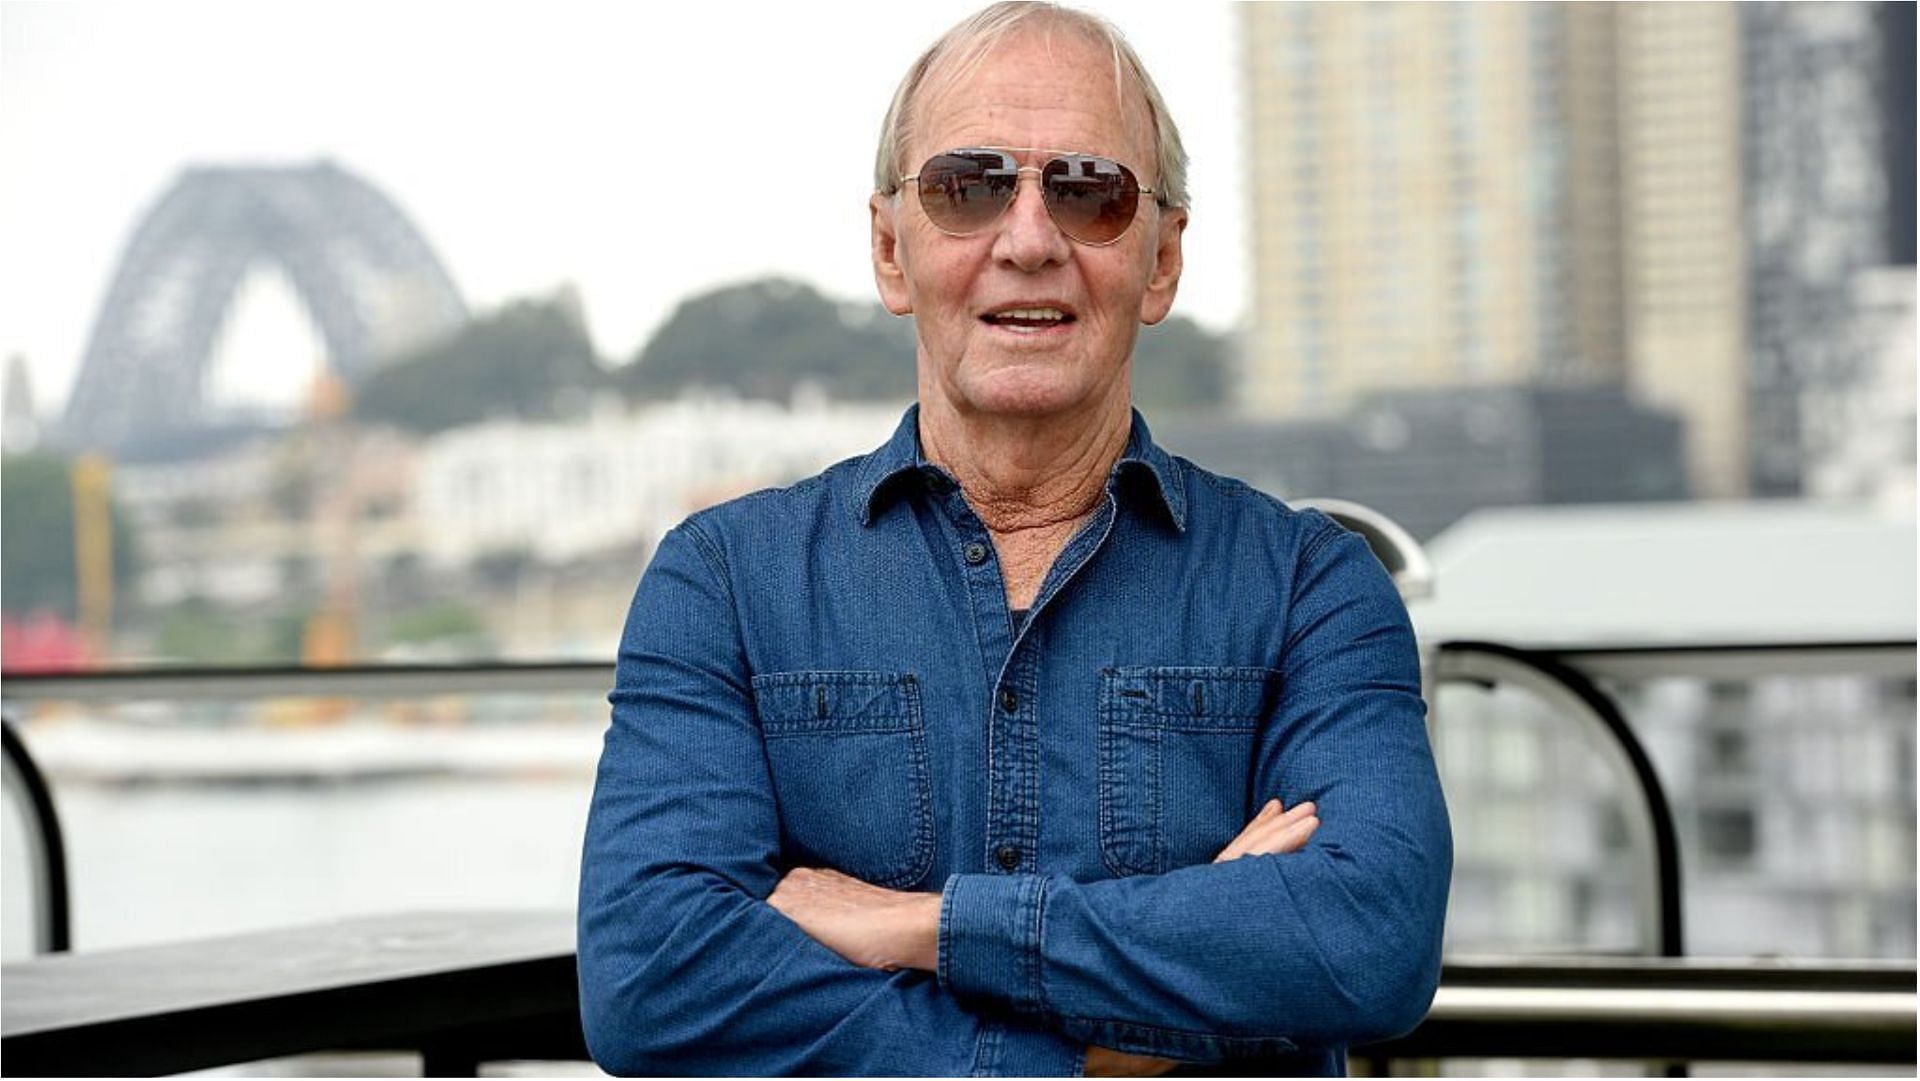 Paul Hogan stated that he wants to return to Australia (Image via Steven Siewert/Getty Images)